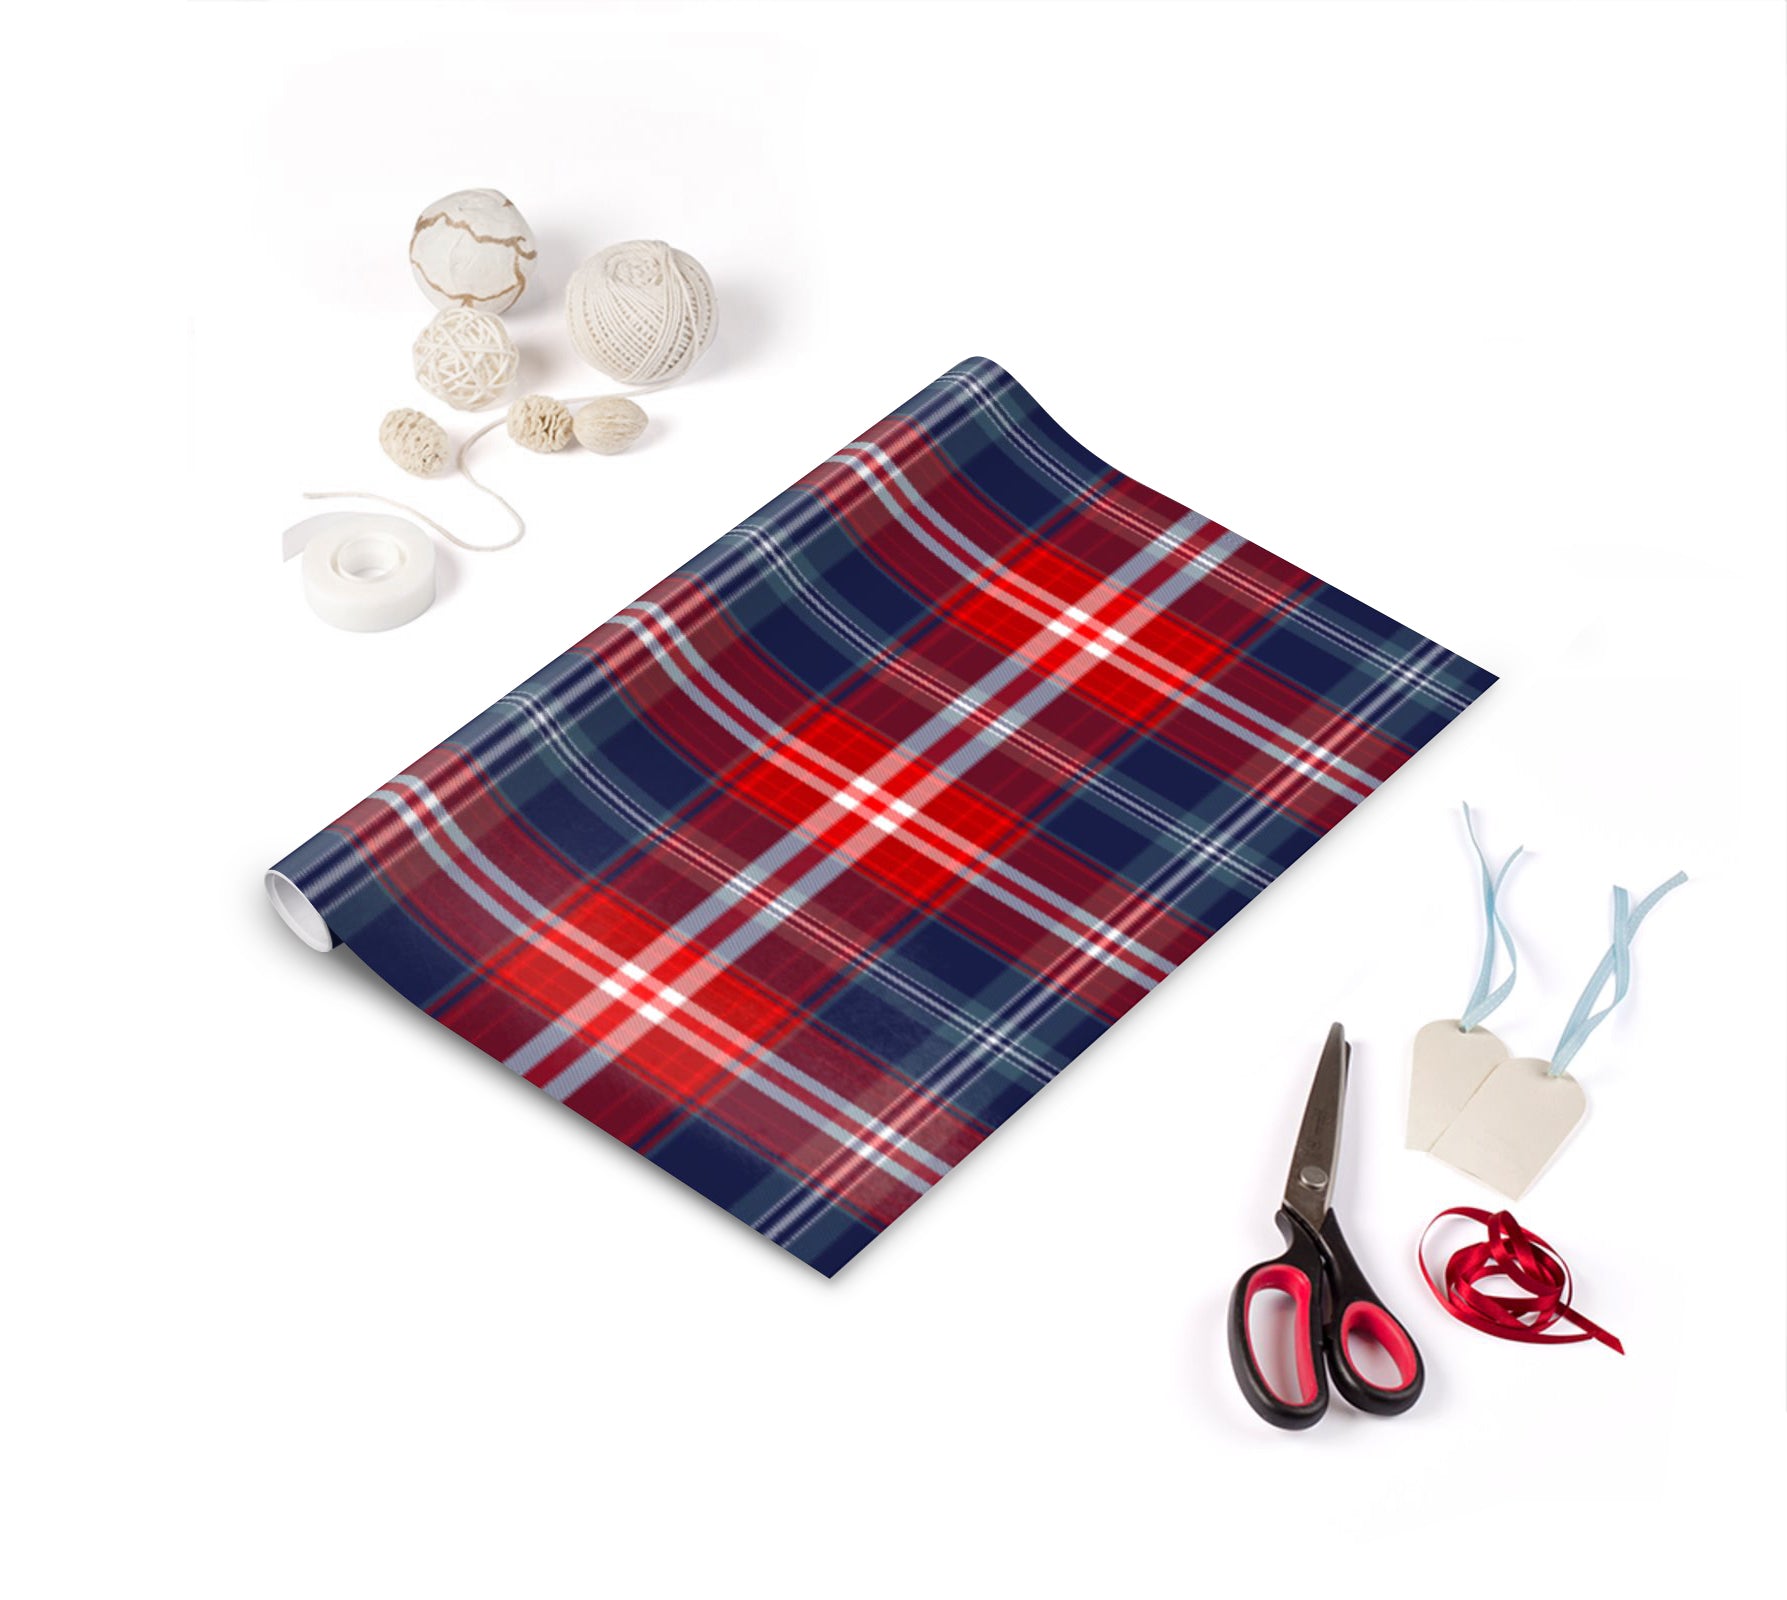 Designer wrapping paper exclusive to the Tartan Artisan ®. Featuring the Star-Spangled Banner ® Tartan, created in 2021 to celebrate the Stars & Stripes of the United Stated of America